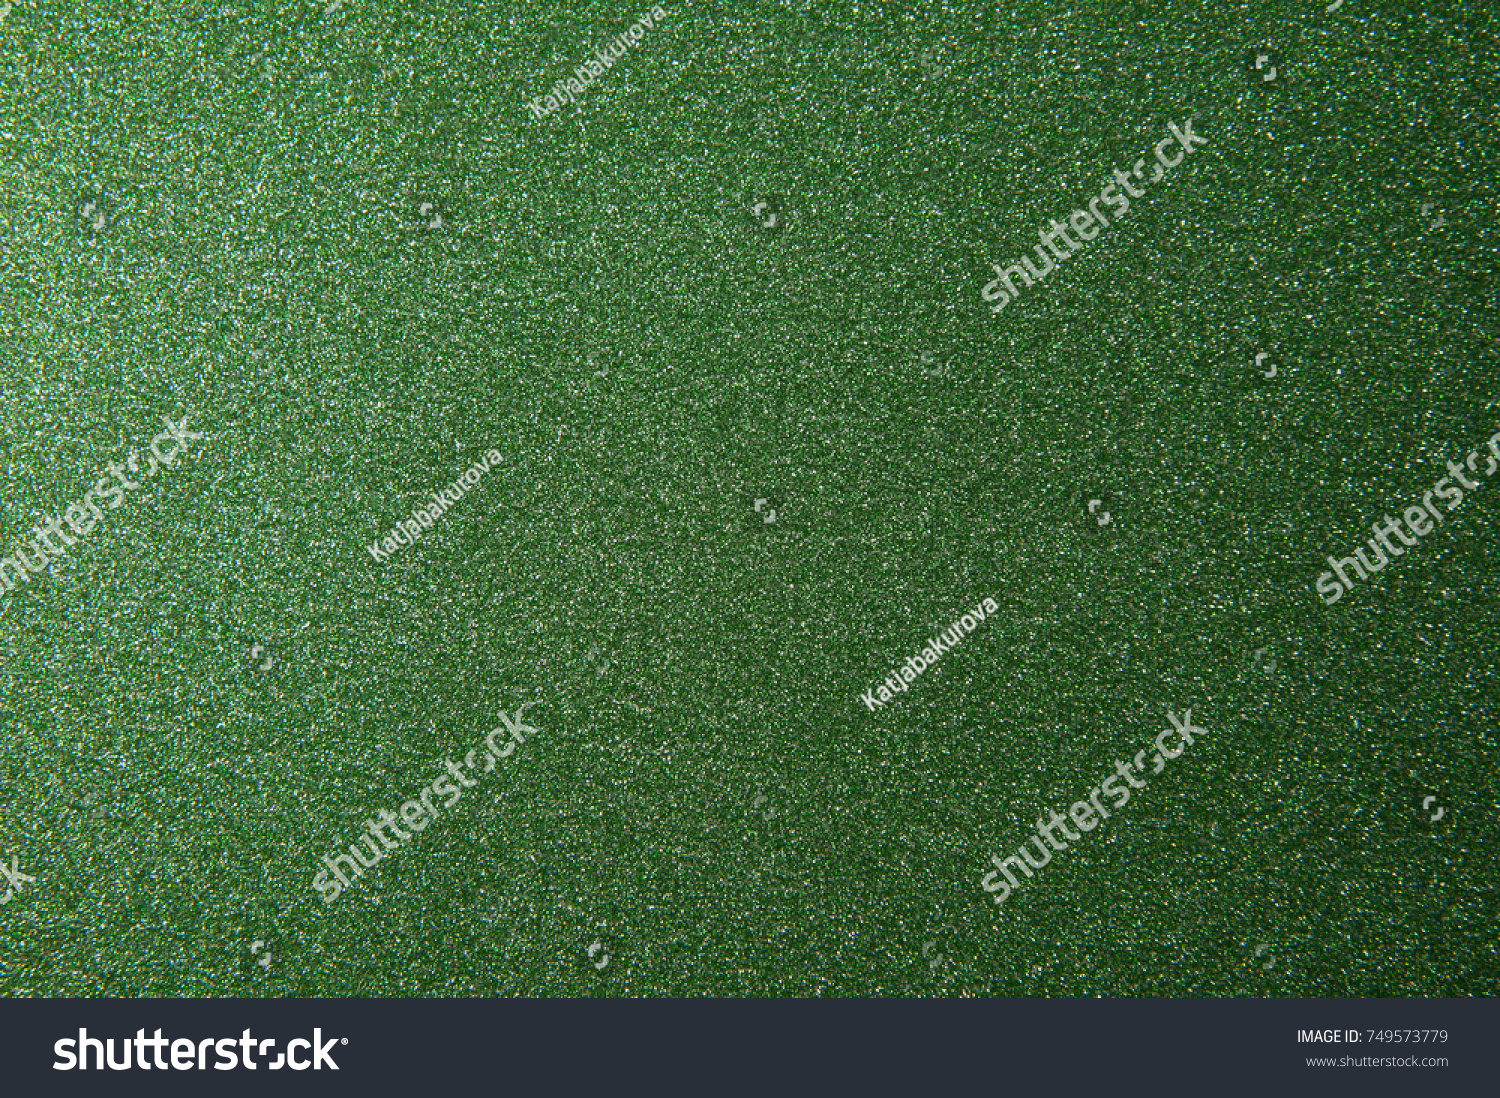 texture of green glitter paper background for design Christmas or New Year's cards #749573779